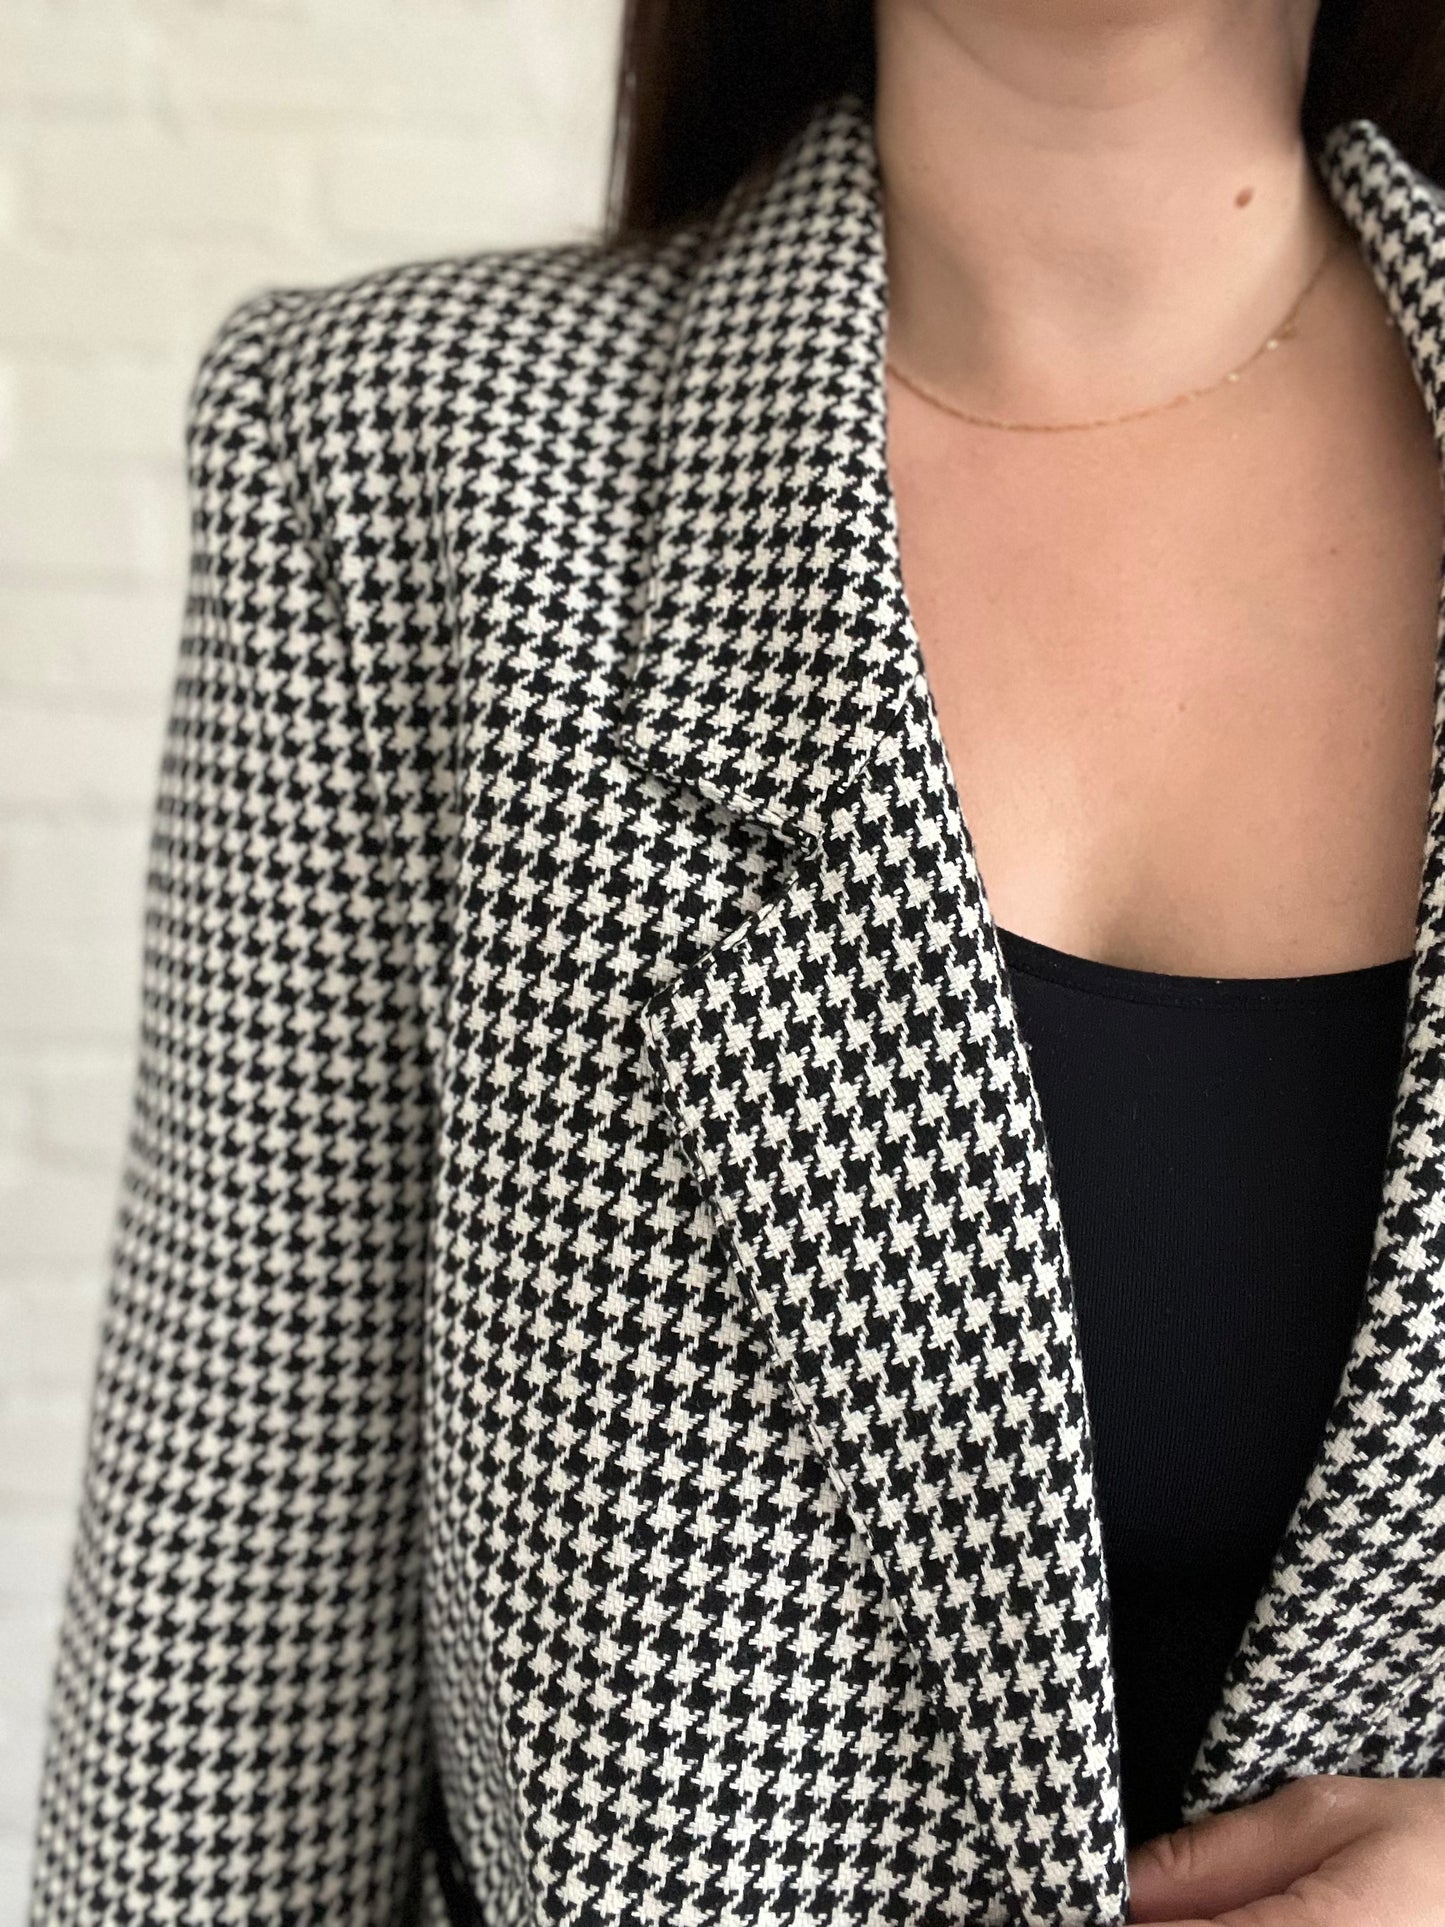 B&W Double Breasted Houndstooth Jacket - Size M